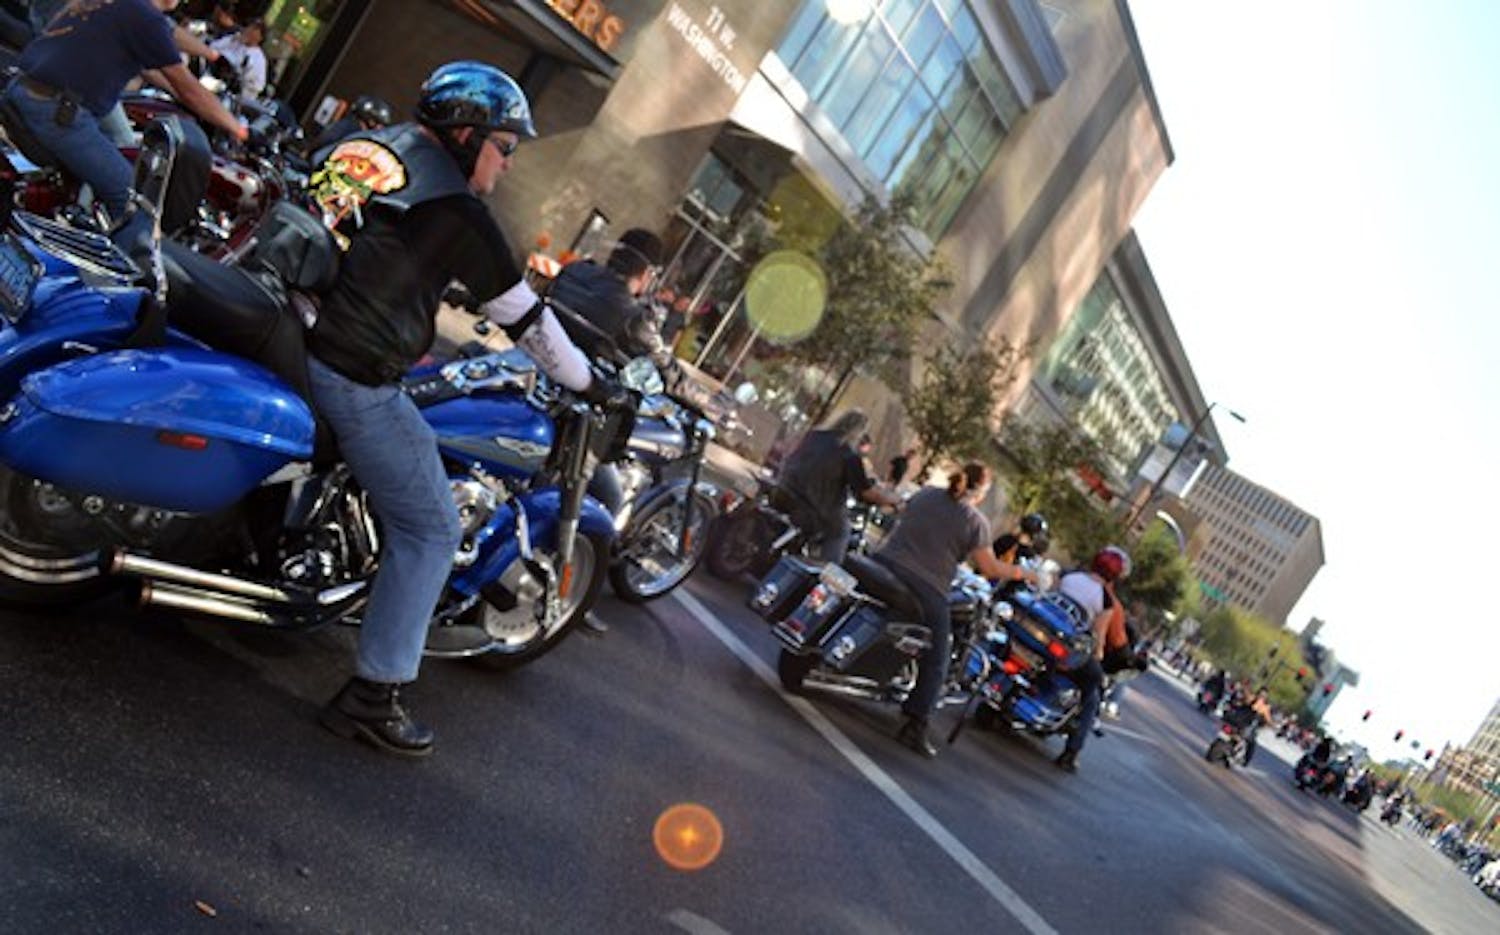 Motorcyclists stop at a light blocks away from the finish line of the Arizona Centennial Ride Saturday afternoon in downtown Phoenix. (Photo by Brittany Lea)